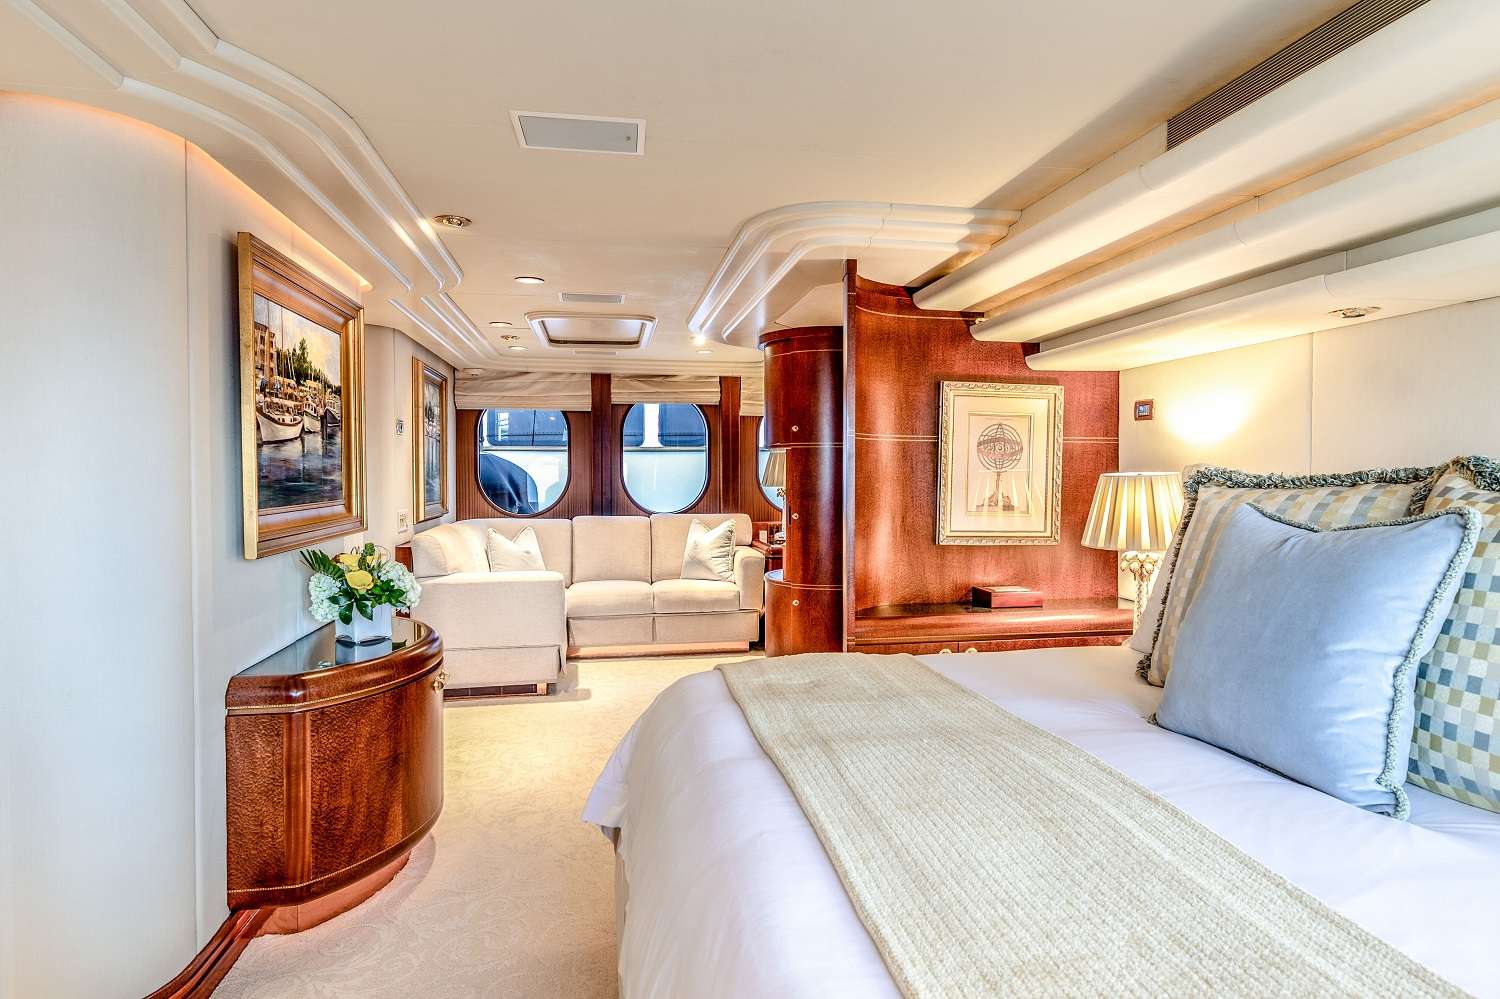 Motor Yacht 'NEVER ENOUGH' Master sitting area, 10 PAX, 7 Crew, 140.00 Ft, 42.00 Meters, Built 1992, Feadship, Refit Year 2019